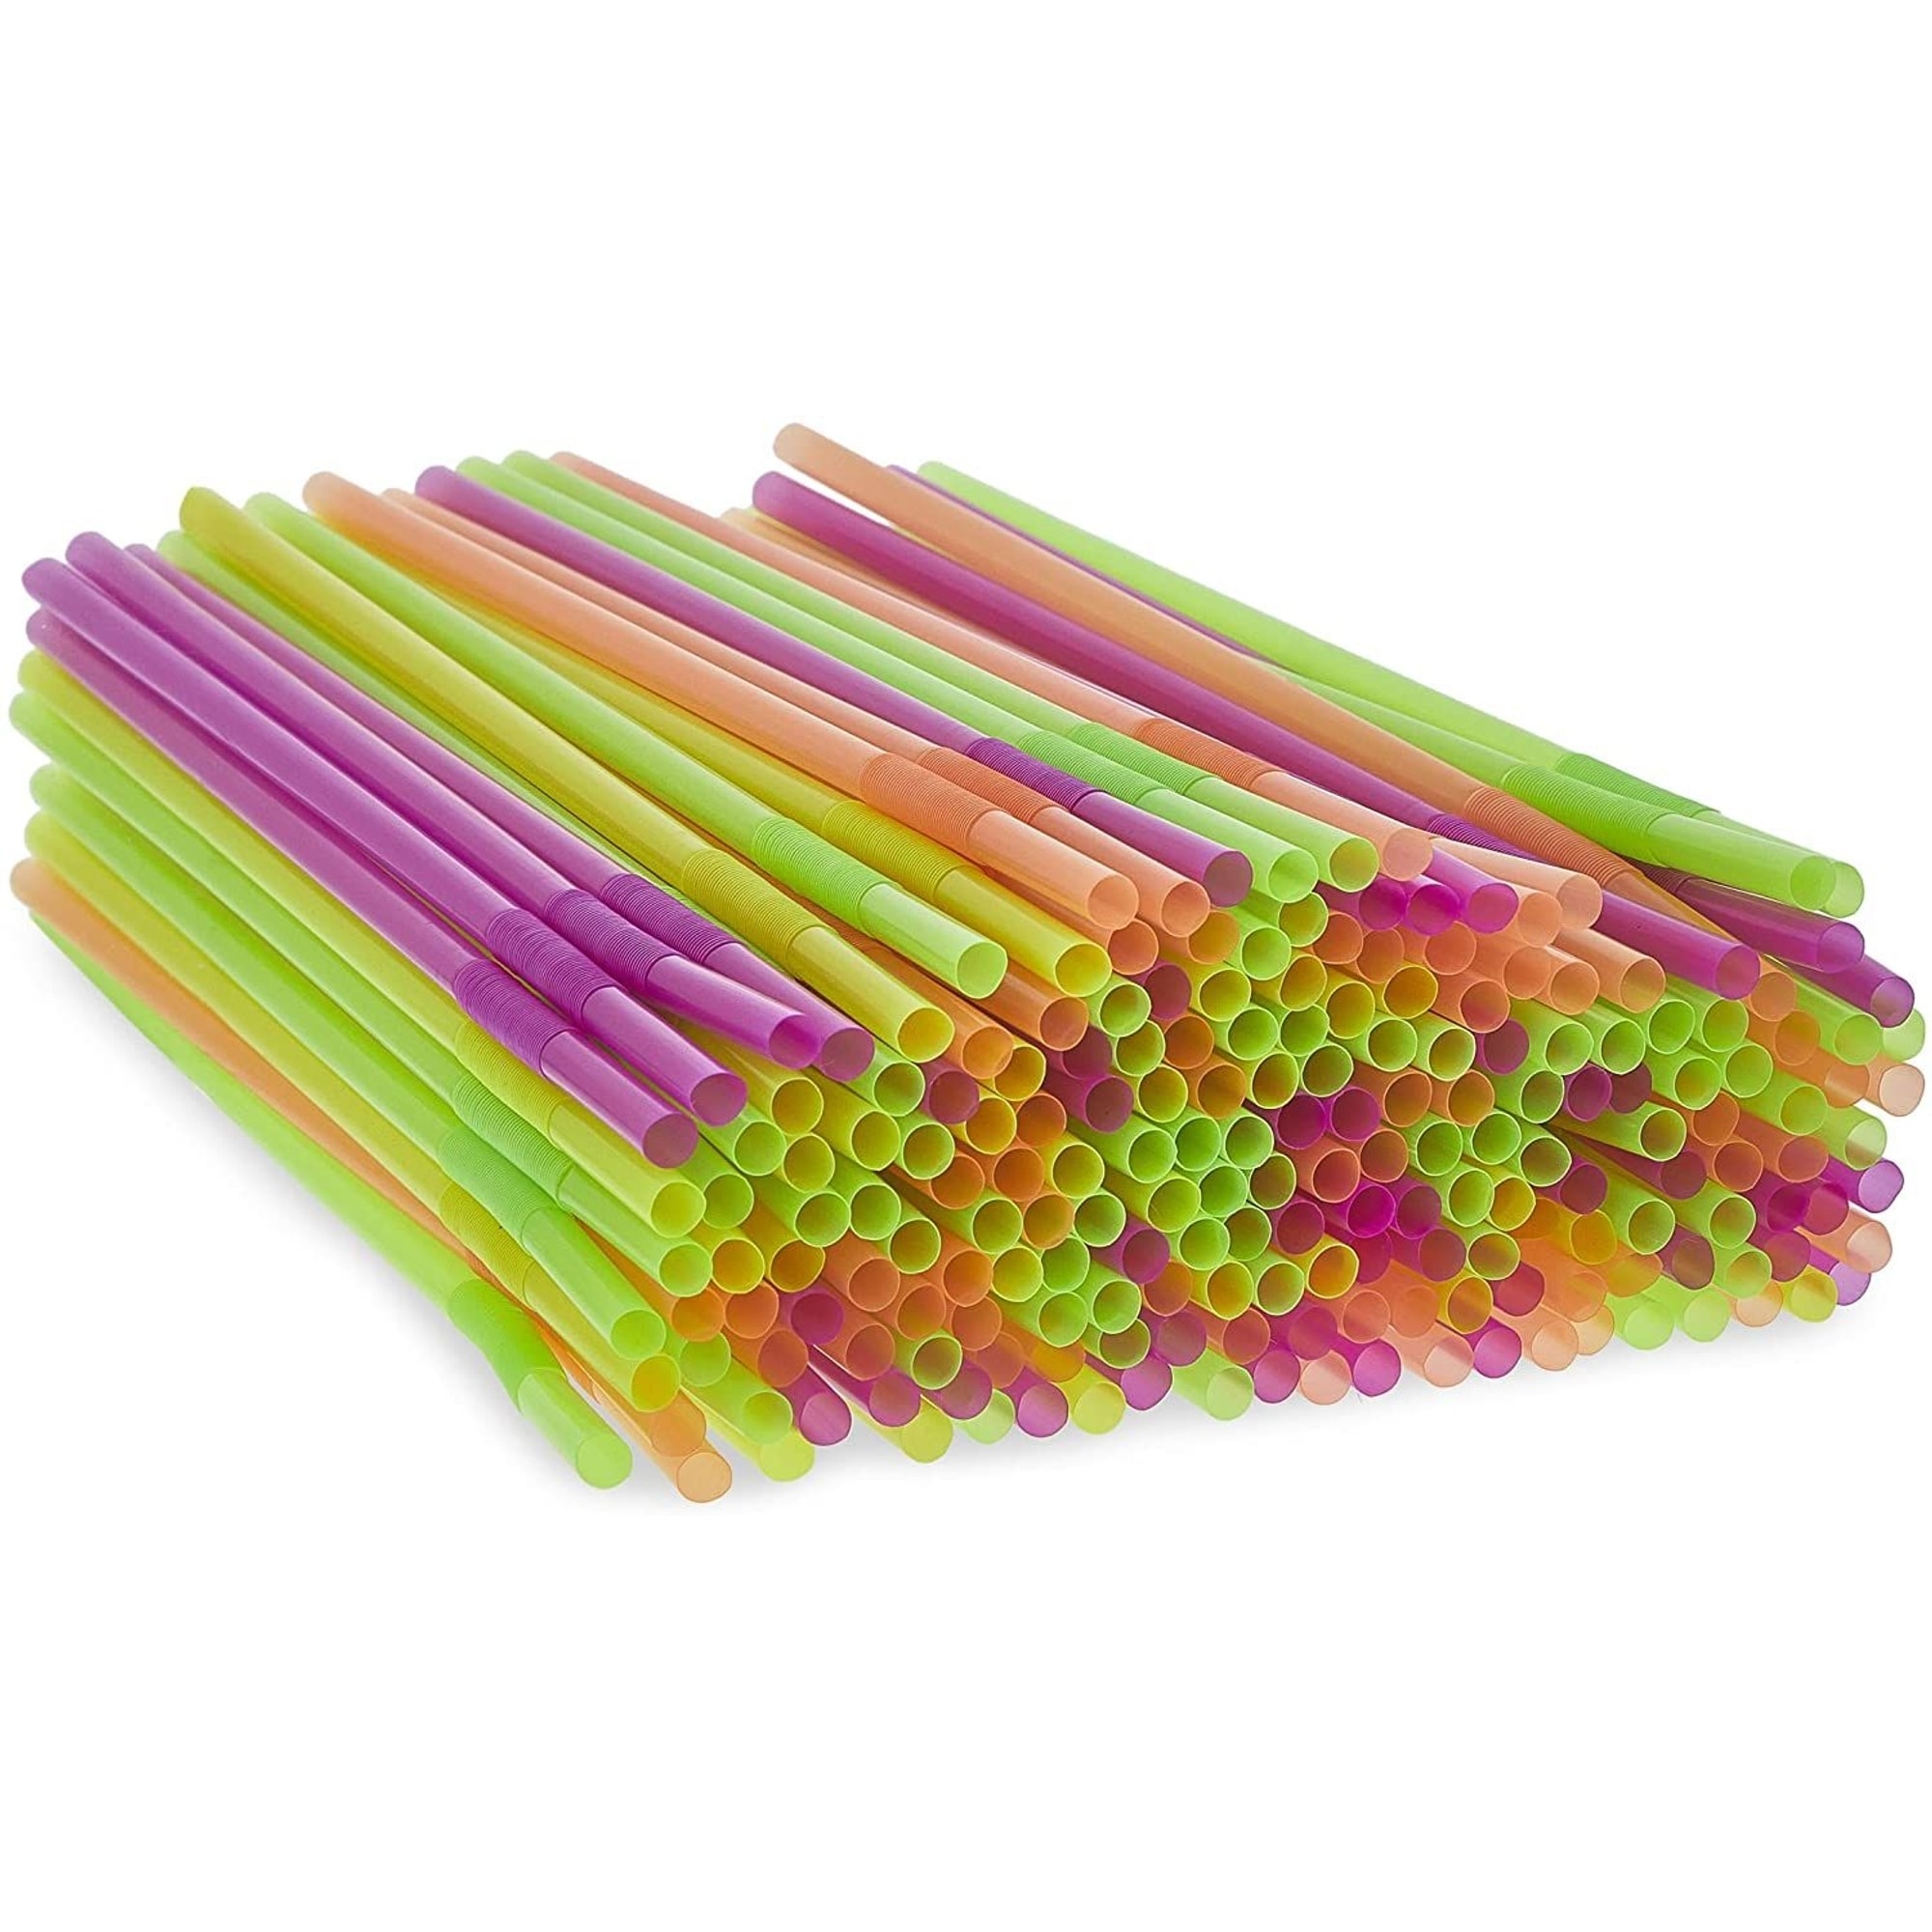 13 Inch Long Flexible Reusable Straws with Natural (Clear) Straw